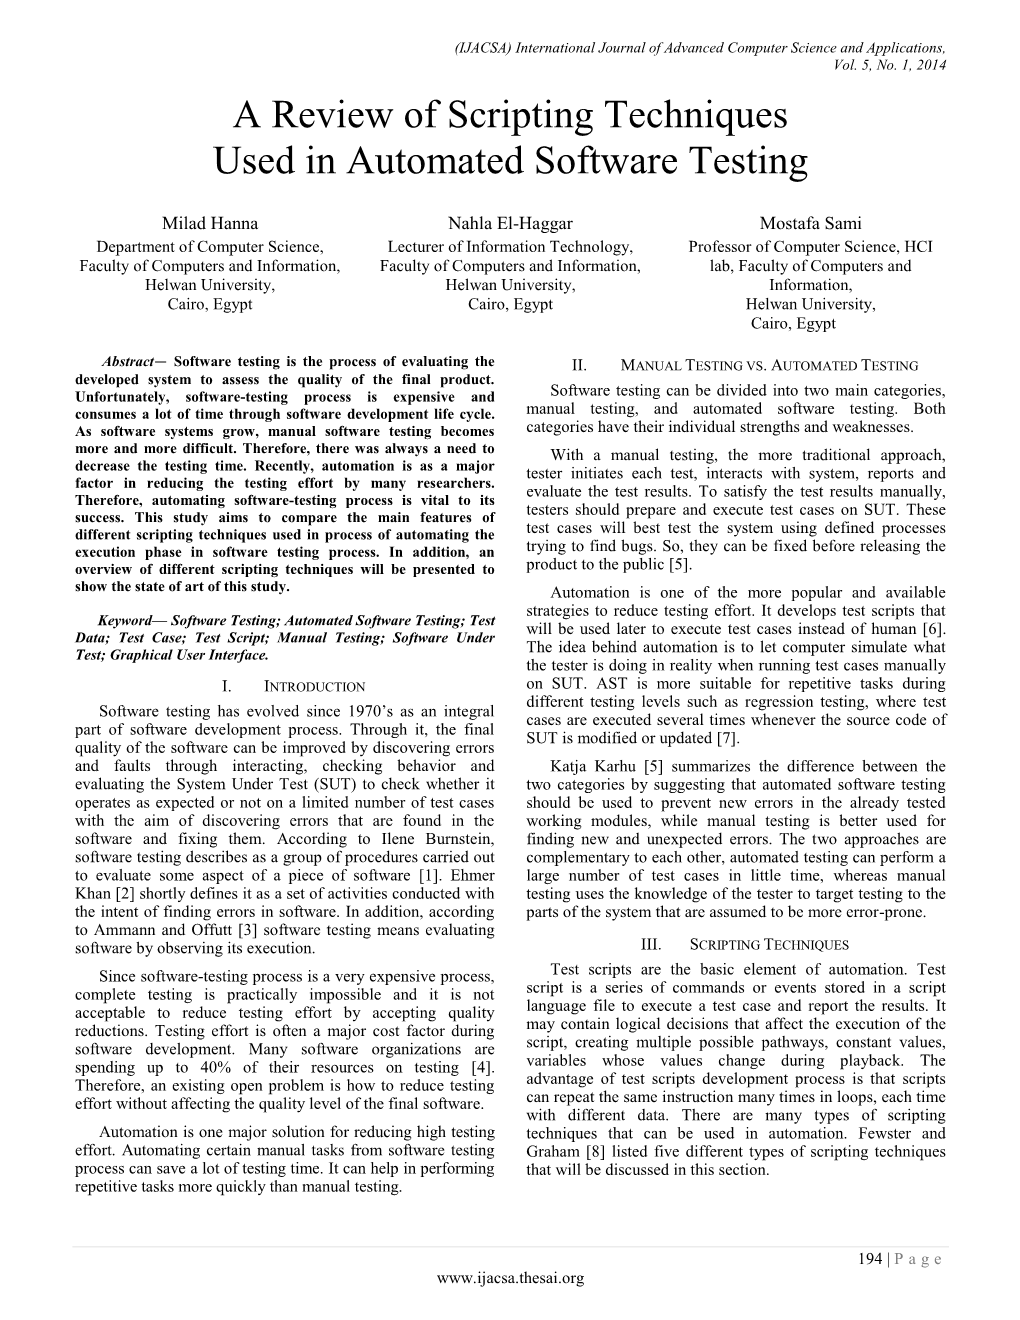 A Review of Scripting Techniques Used in Automated Software Testing